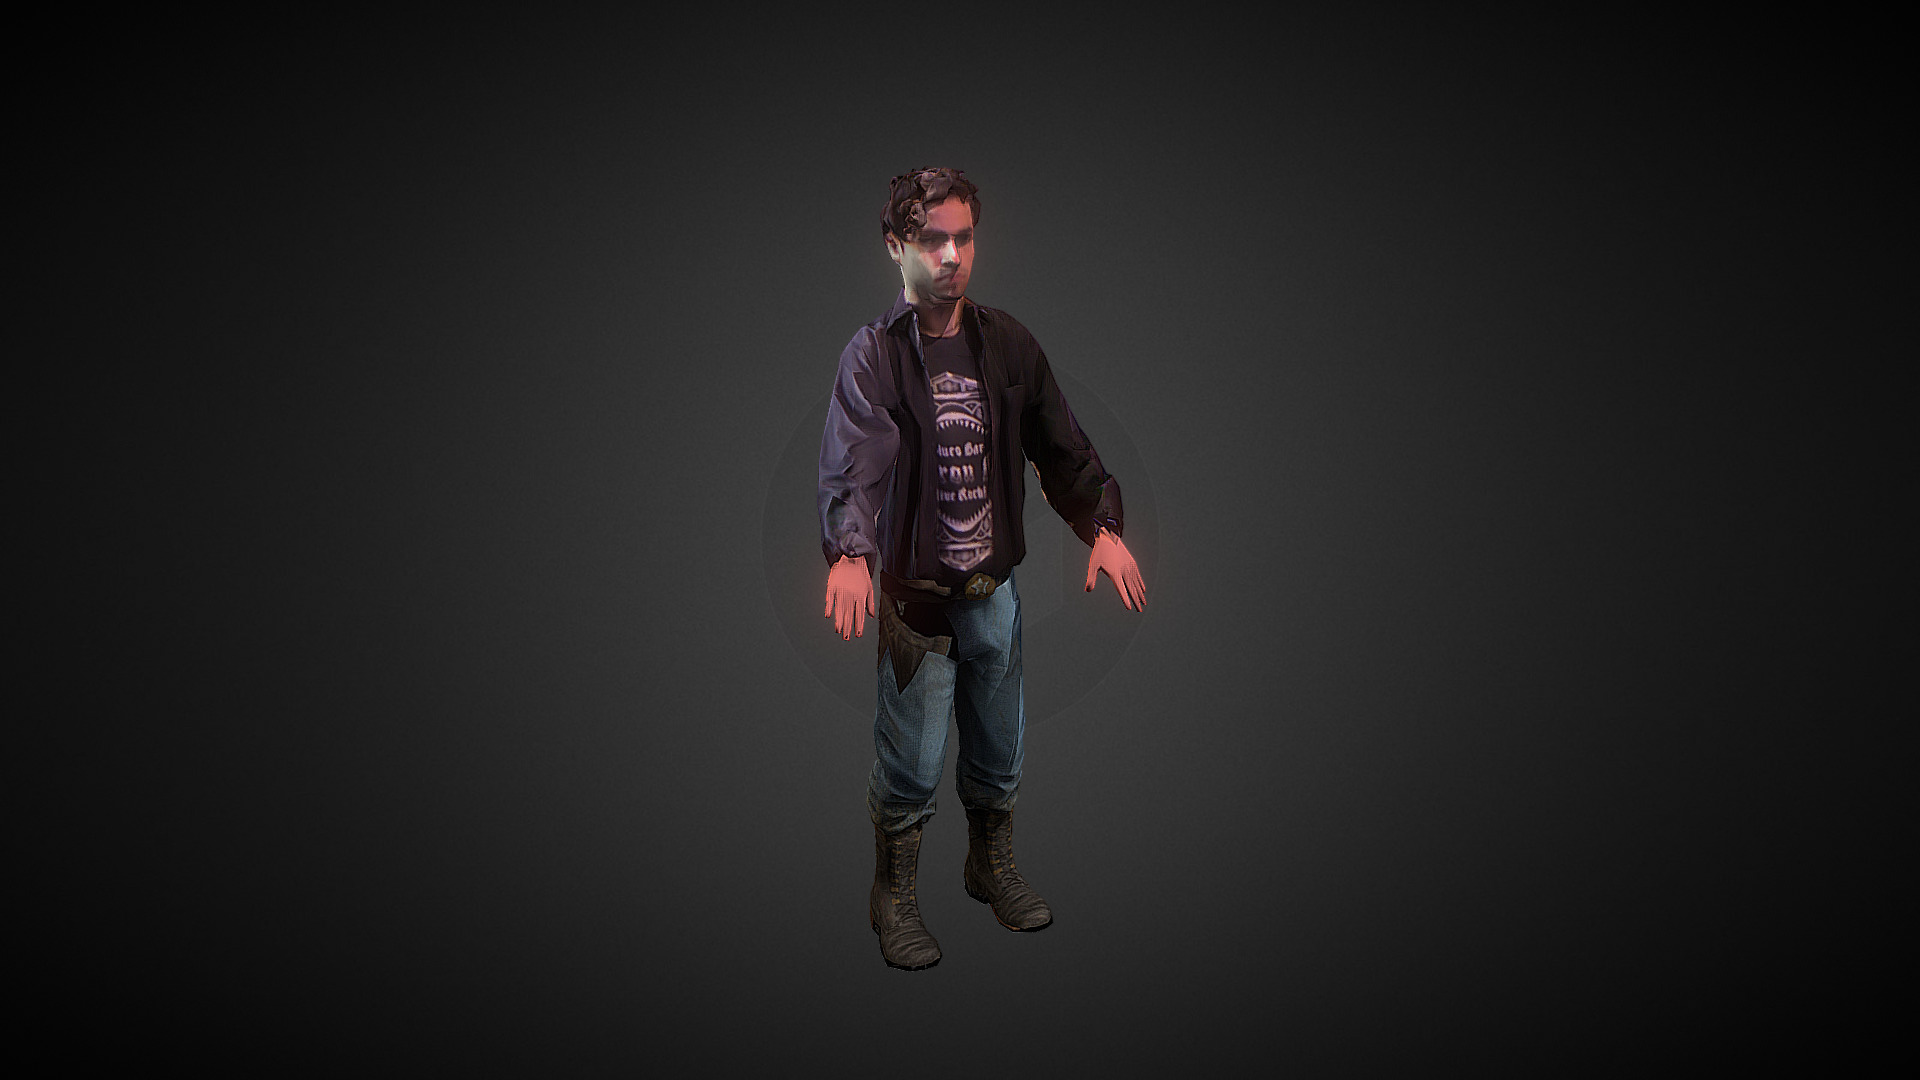 3D model Wilmer - This is a 3D model of the Wilmer. The 3D model is about a man wearing a purple shirt and jeans.